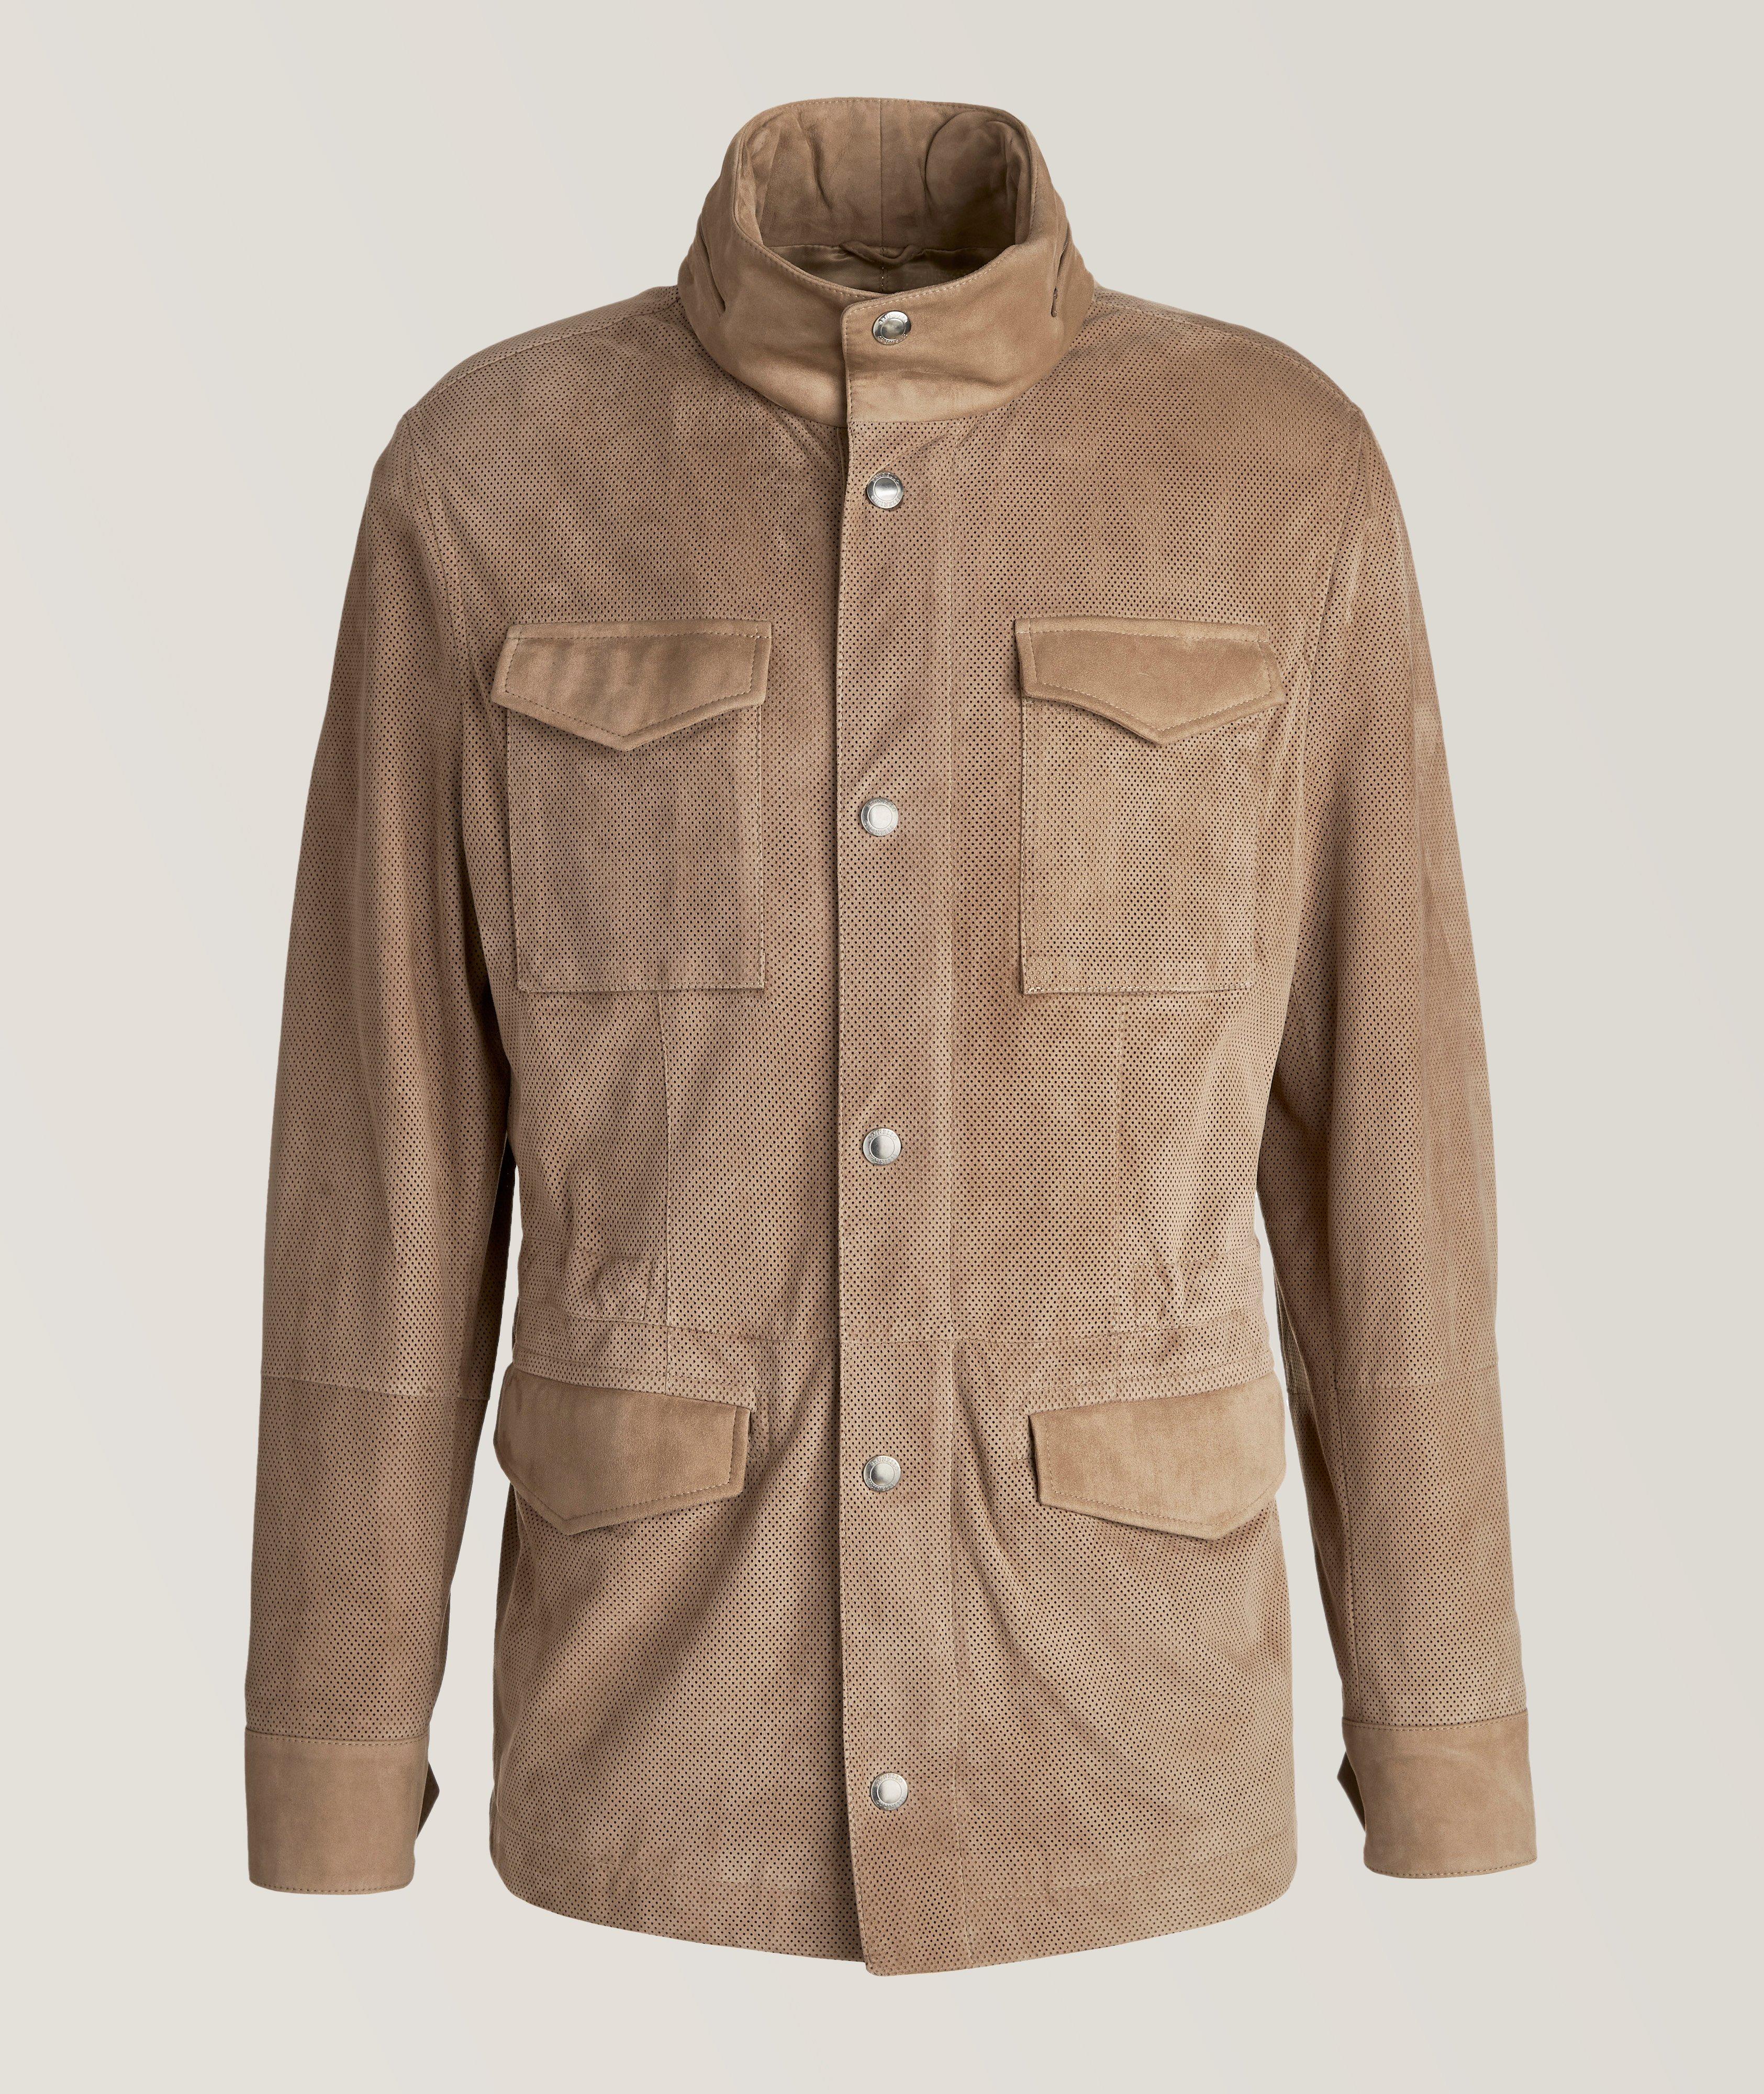 Perforated Suede Field Jacket image 0